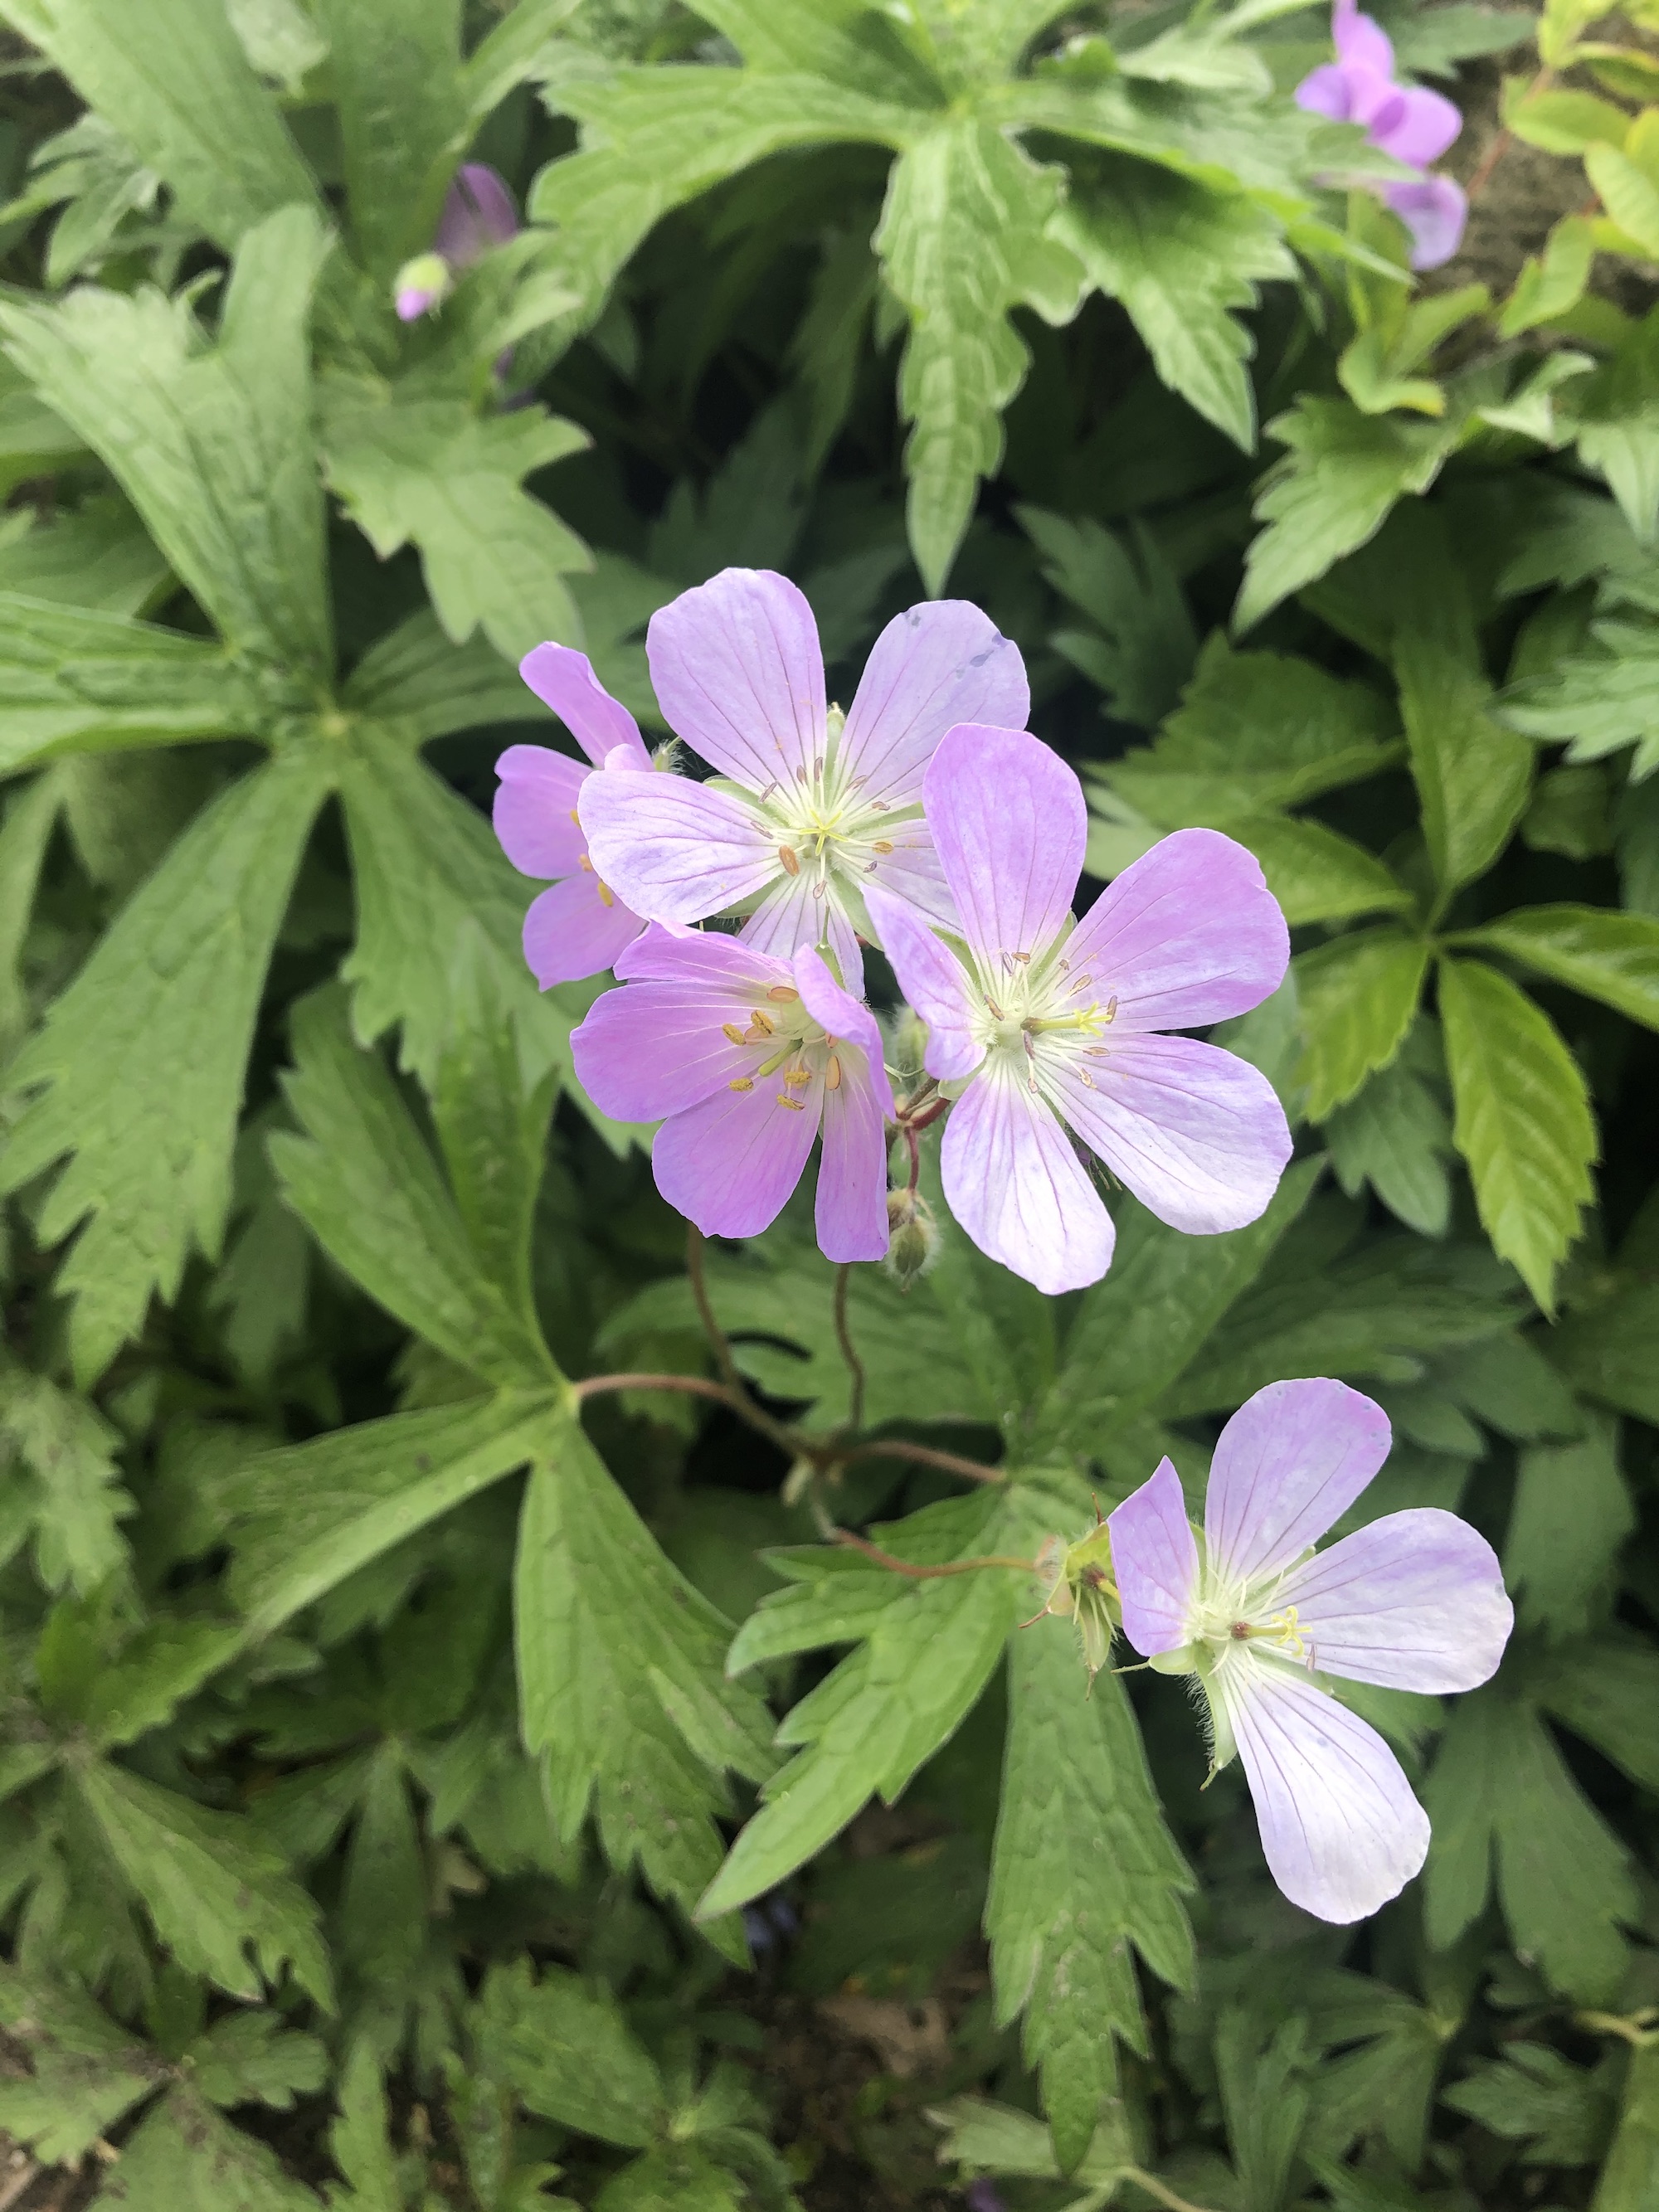 Wild Geranium by Council Ring in Oak Savanna in Madison, Wisconsin on May 10, 2021.